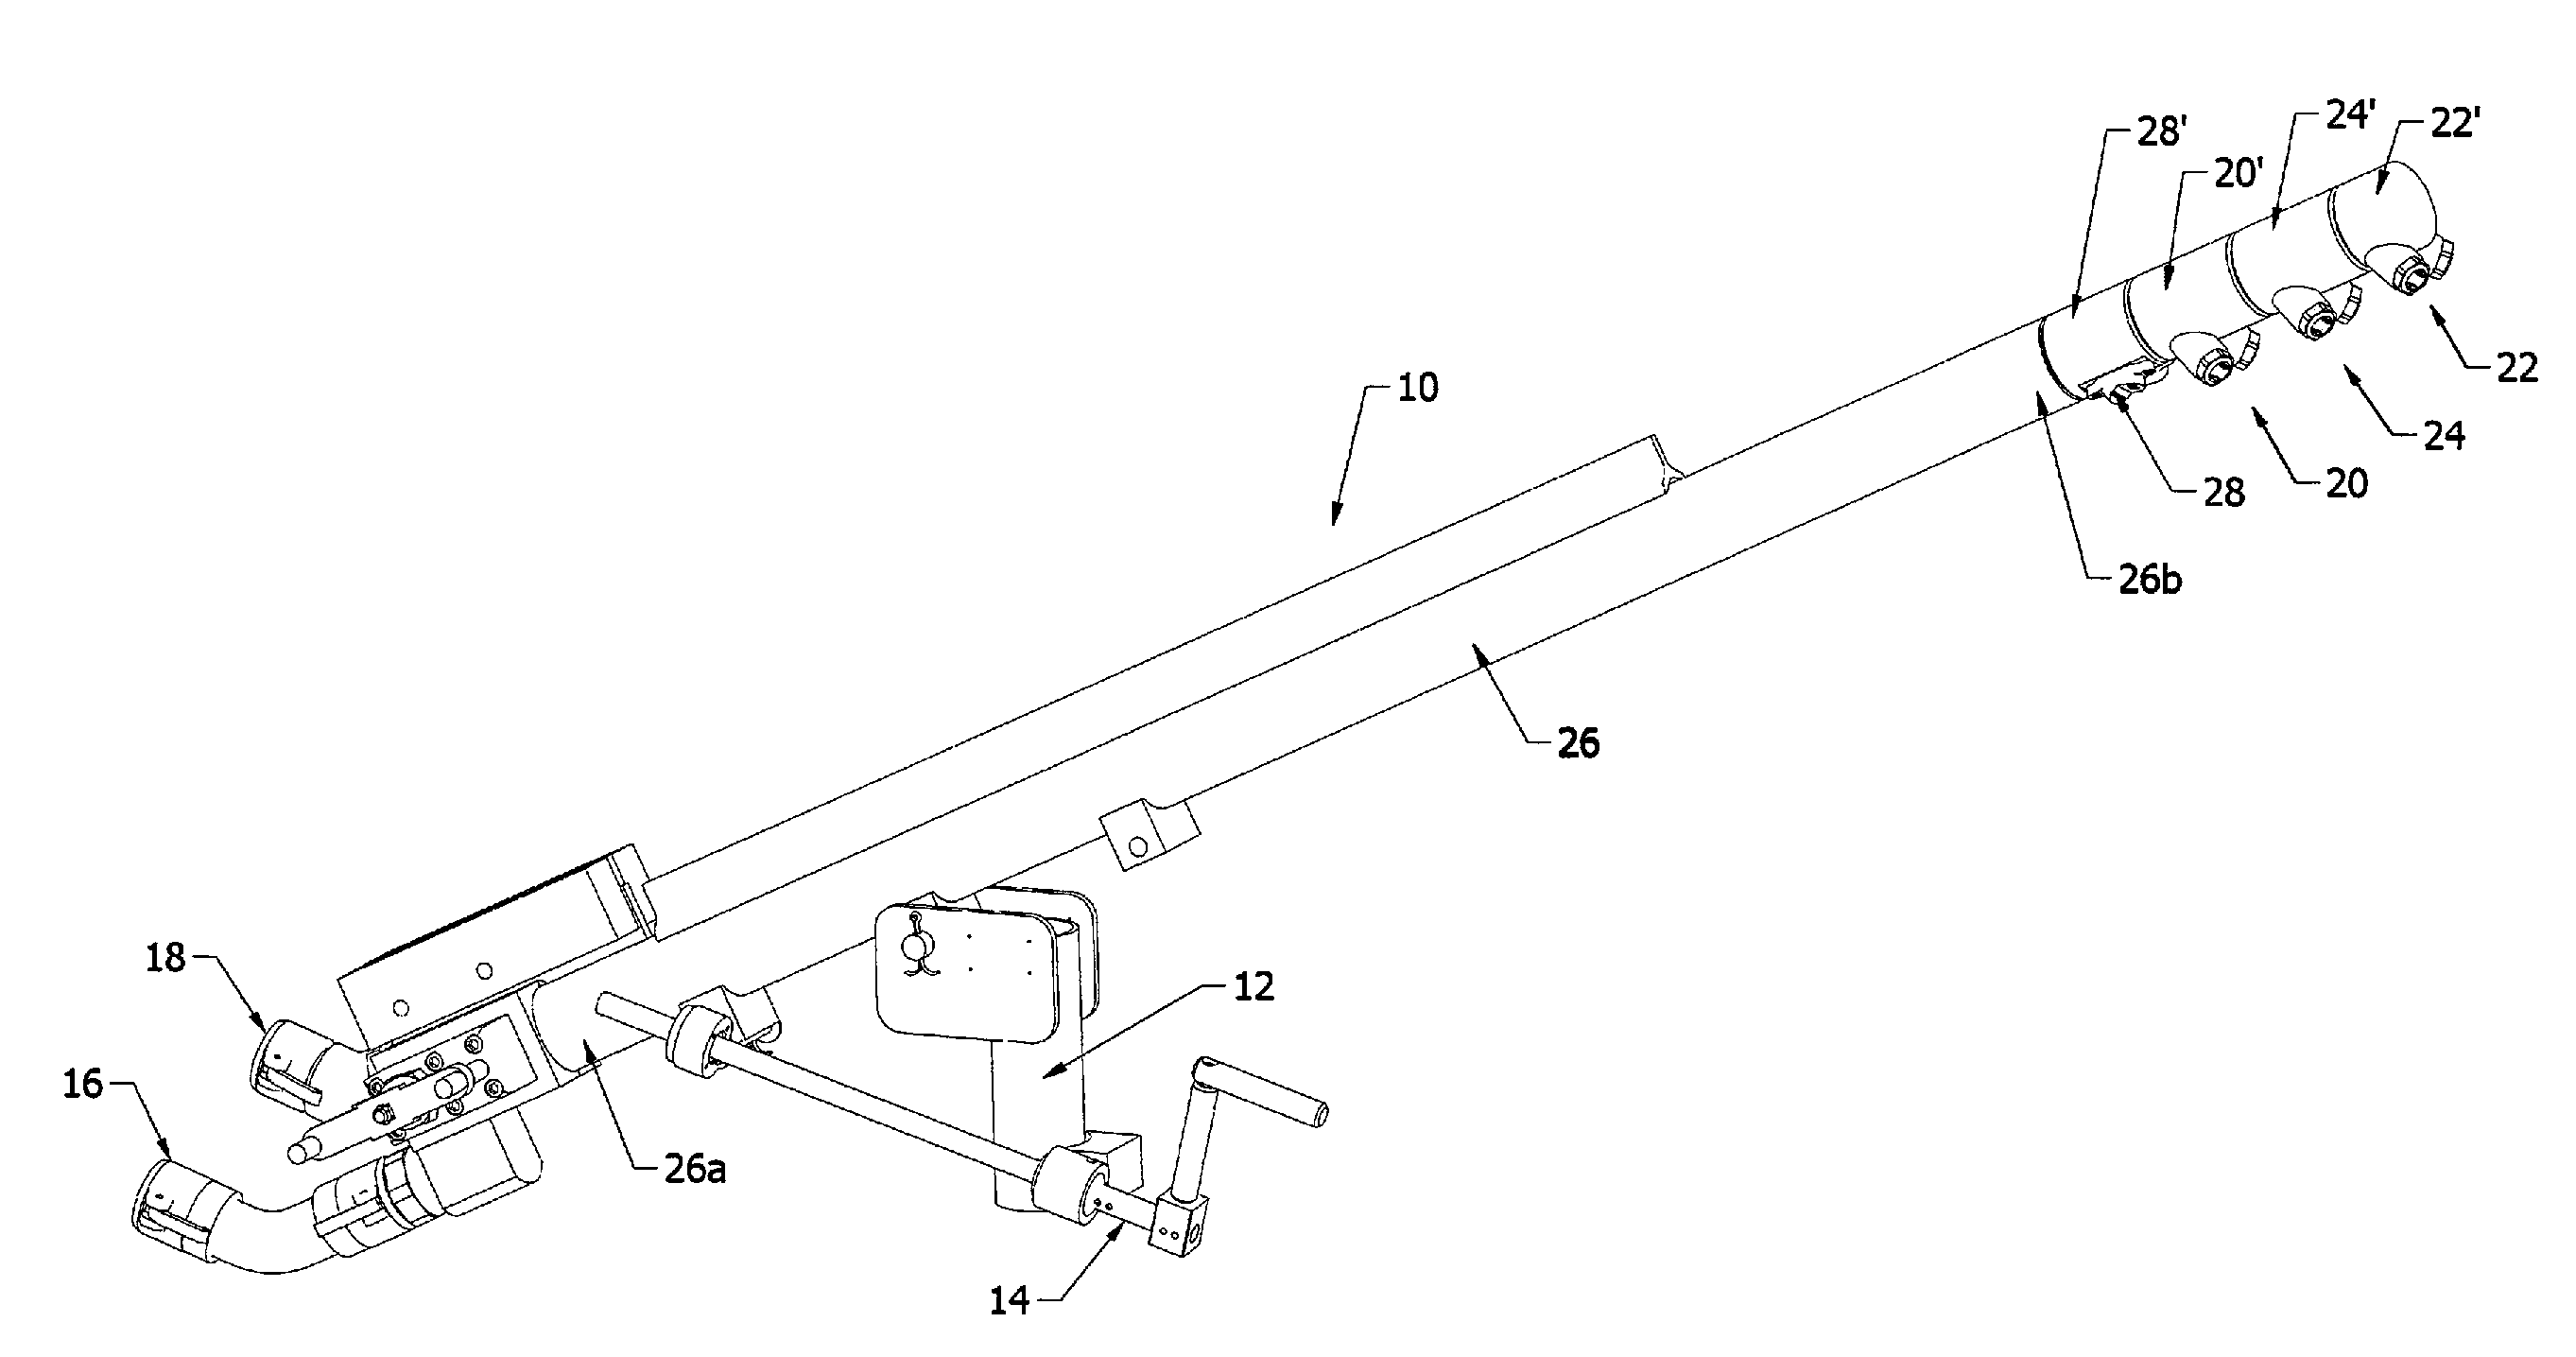 Snow Making Apparatus and Method